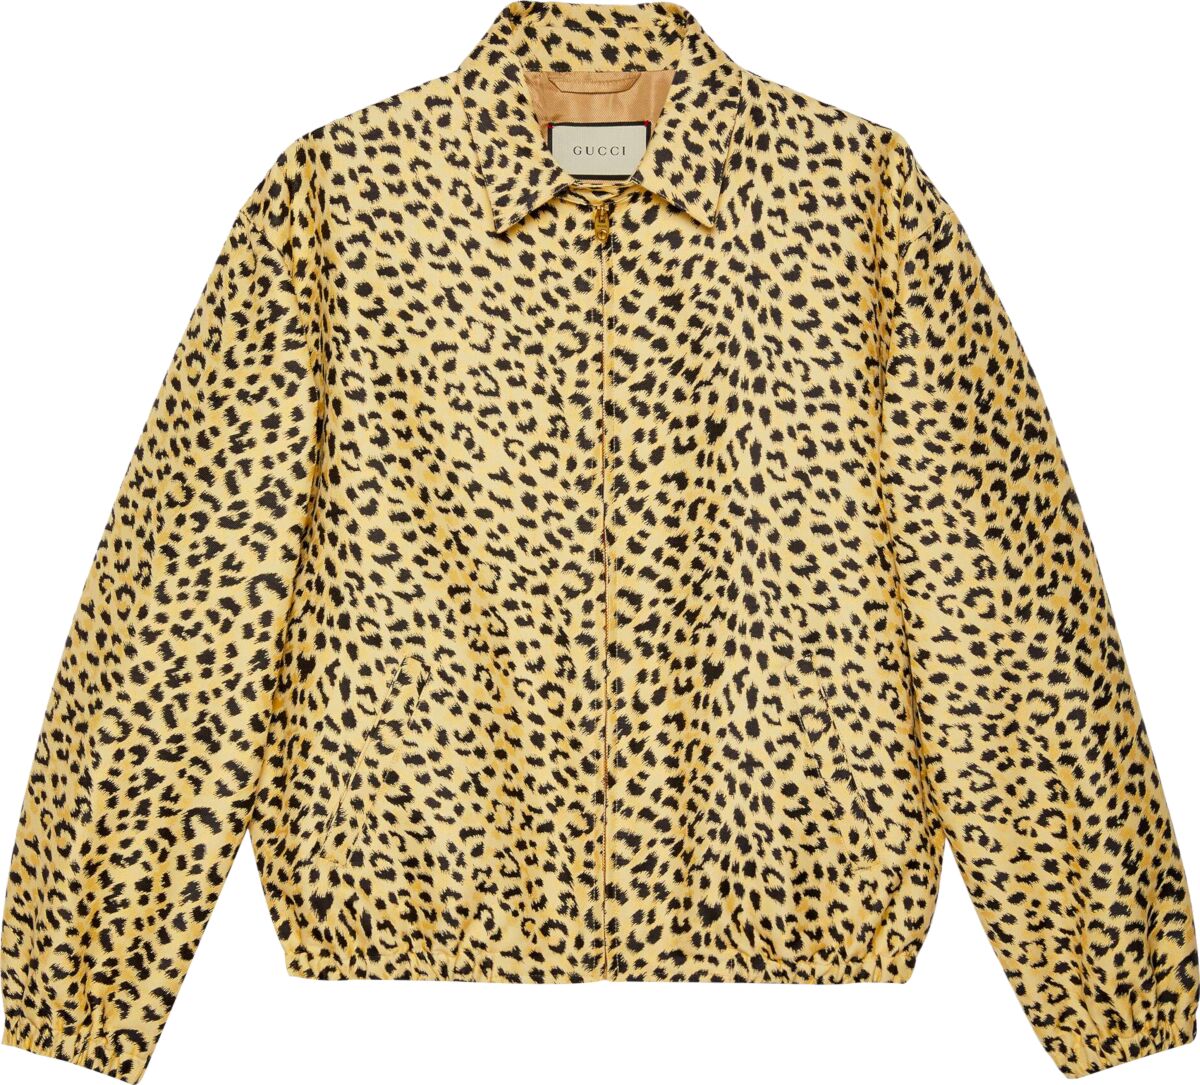 Gucci Yellow & Black Leopard Print Jacket | Incorporated Style